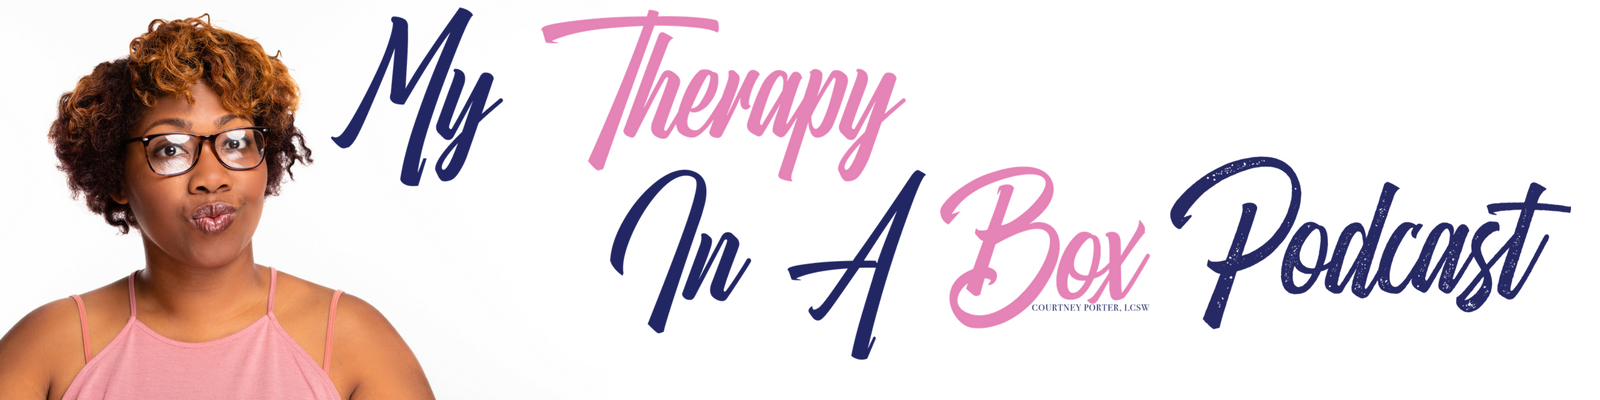 My Therapy In A Box Podcast